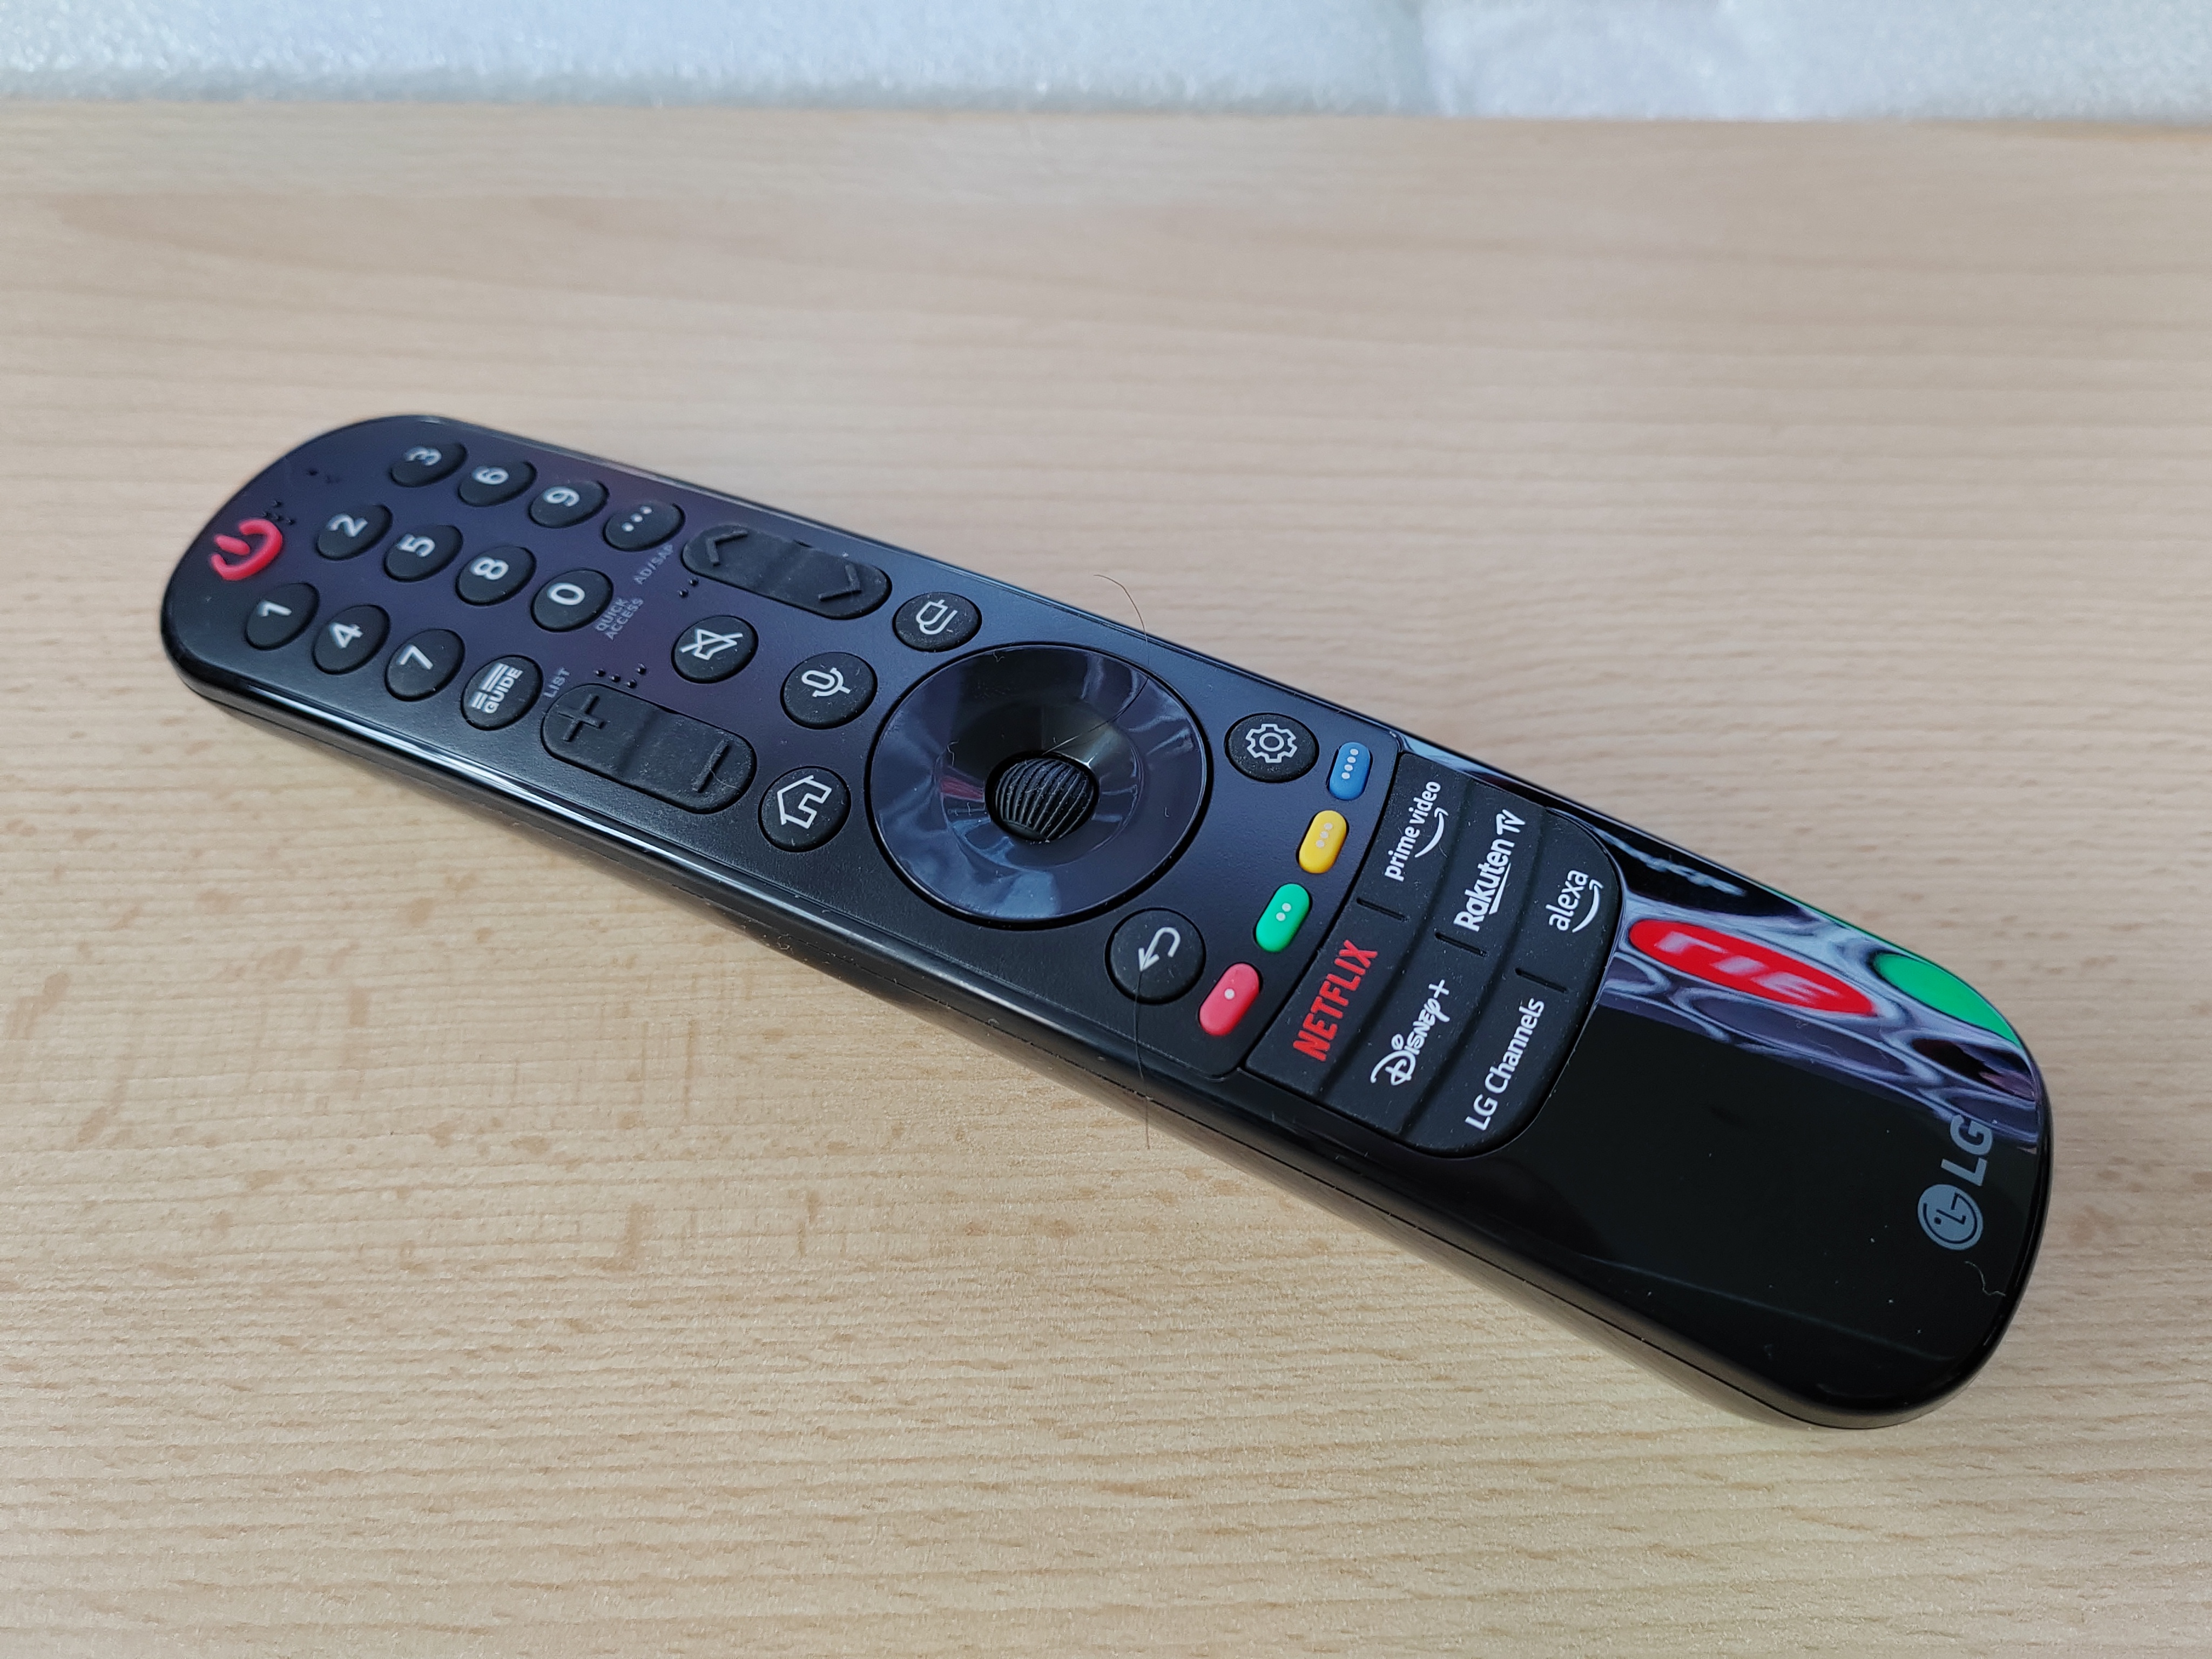 LG OLED G3's remote control, showing its bespoke buttons for Netflix, Disney+, Prime Video, and Rakouten TV